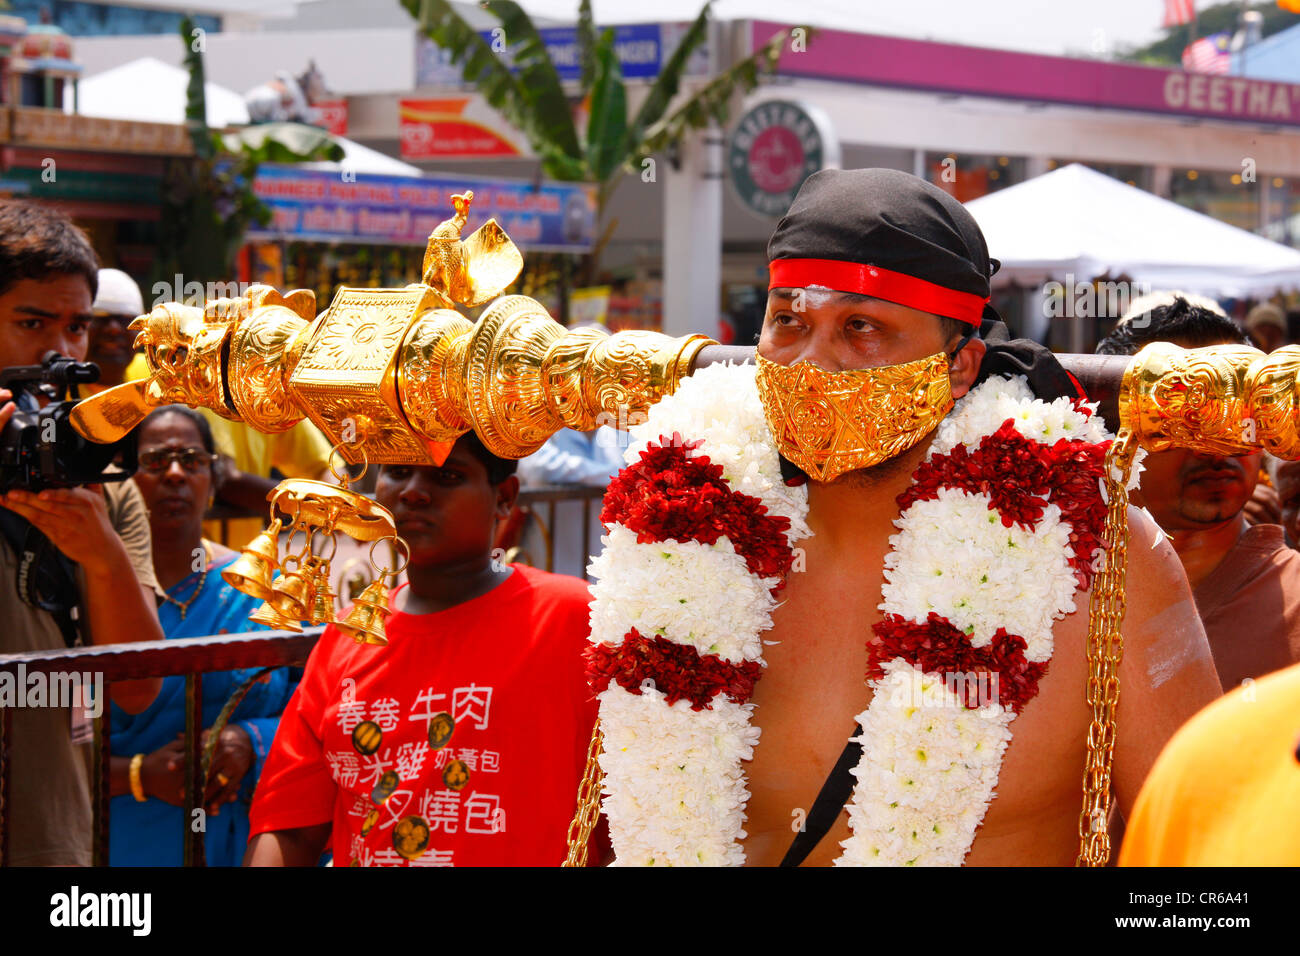 Holy man with sealed mouth and load on his shoulders, Hindu festival Thaipusam, Batu Caves limestone caves and temples Stock Photo